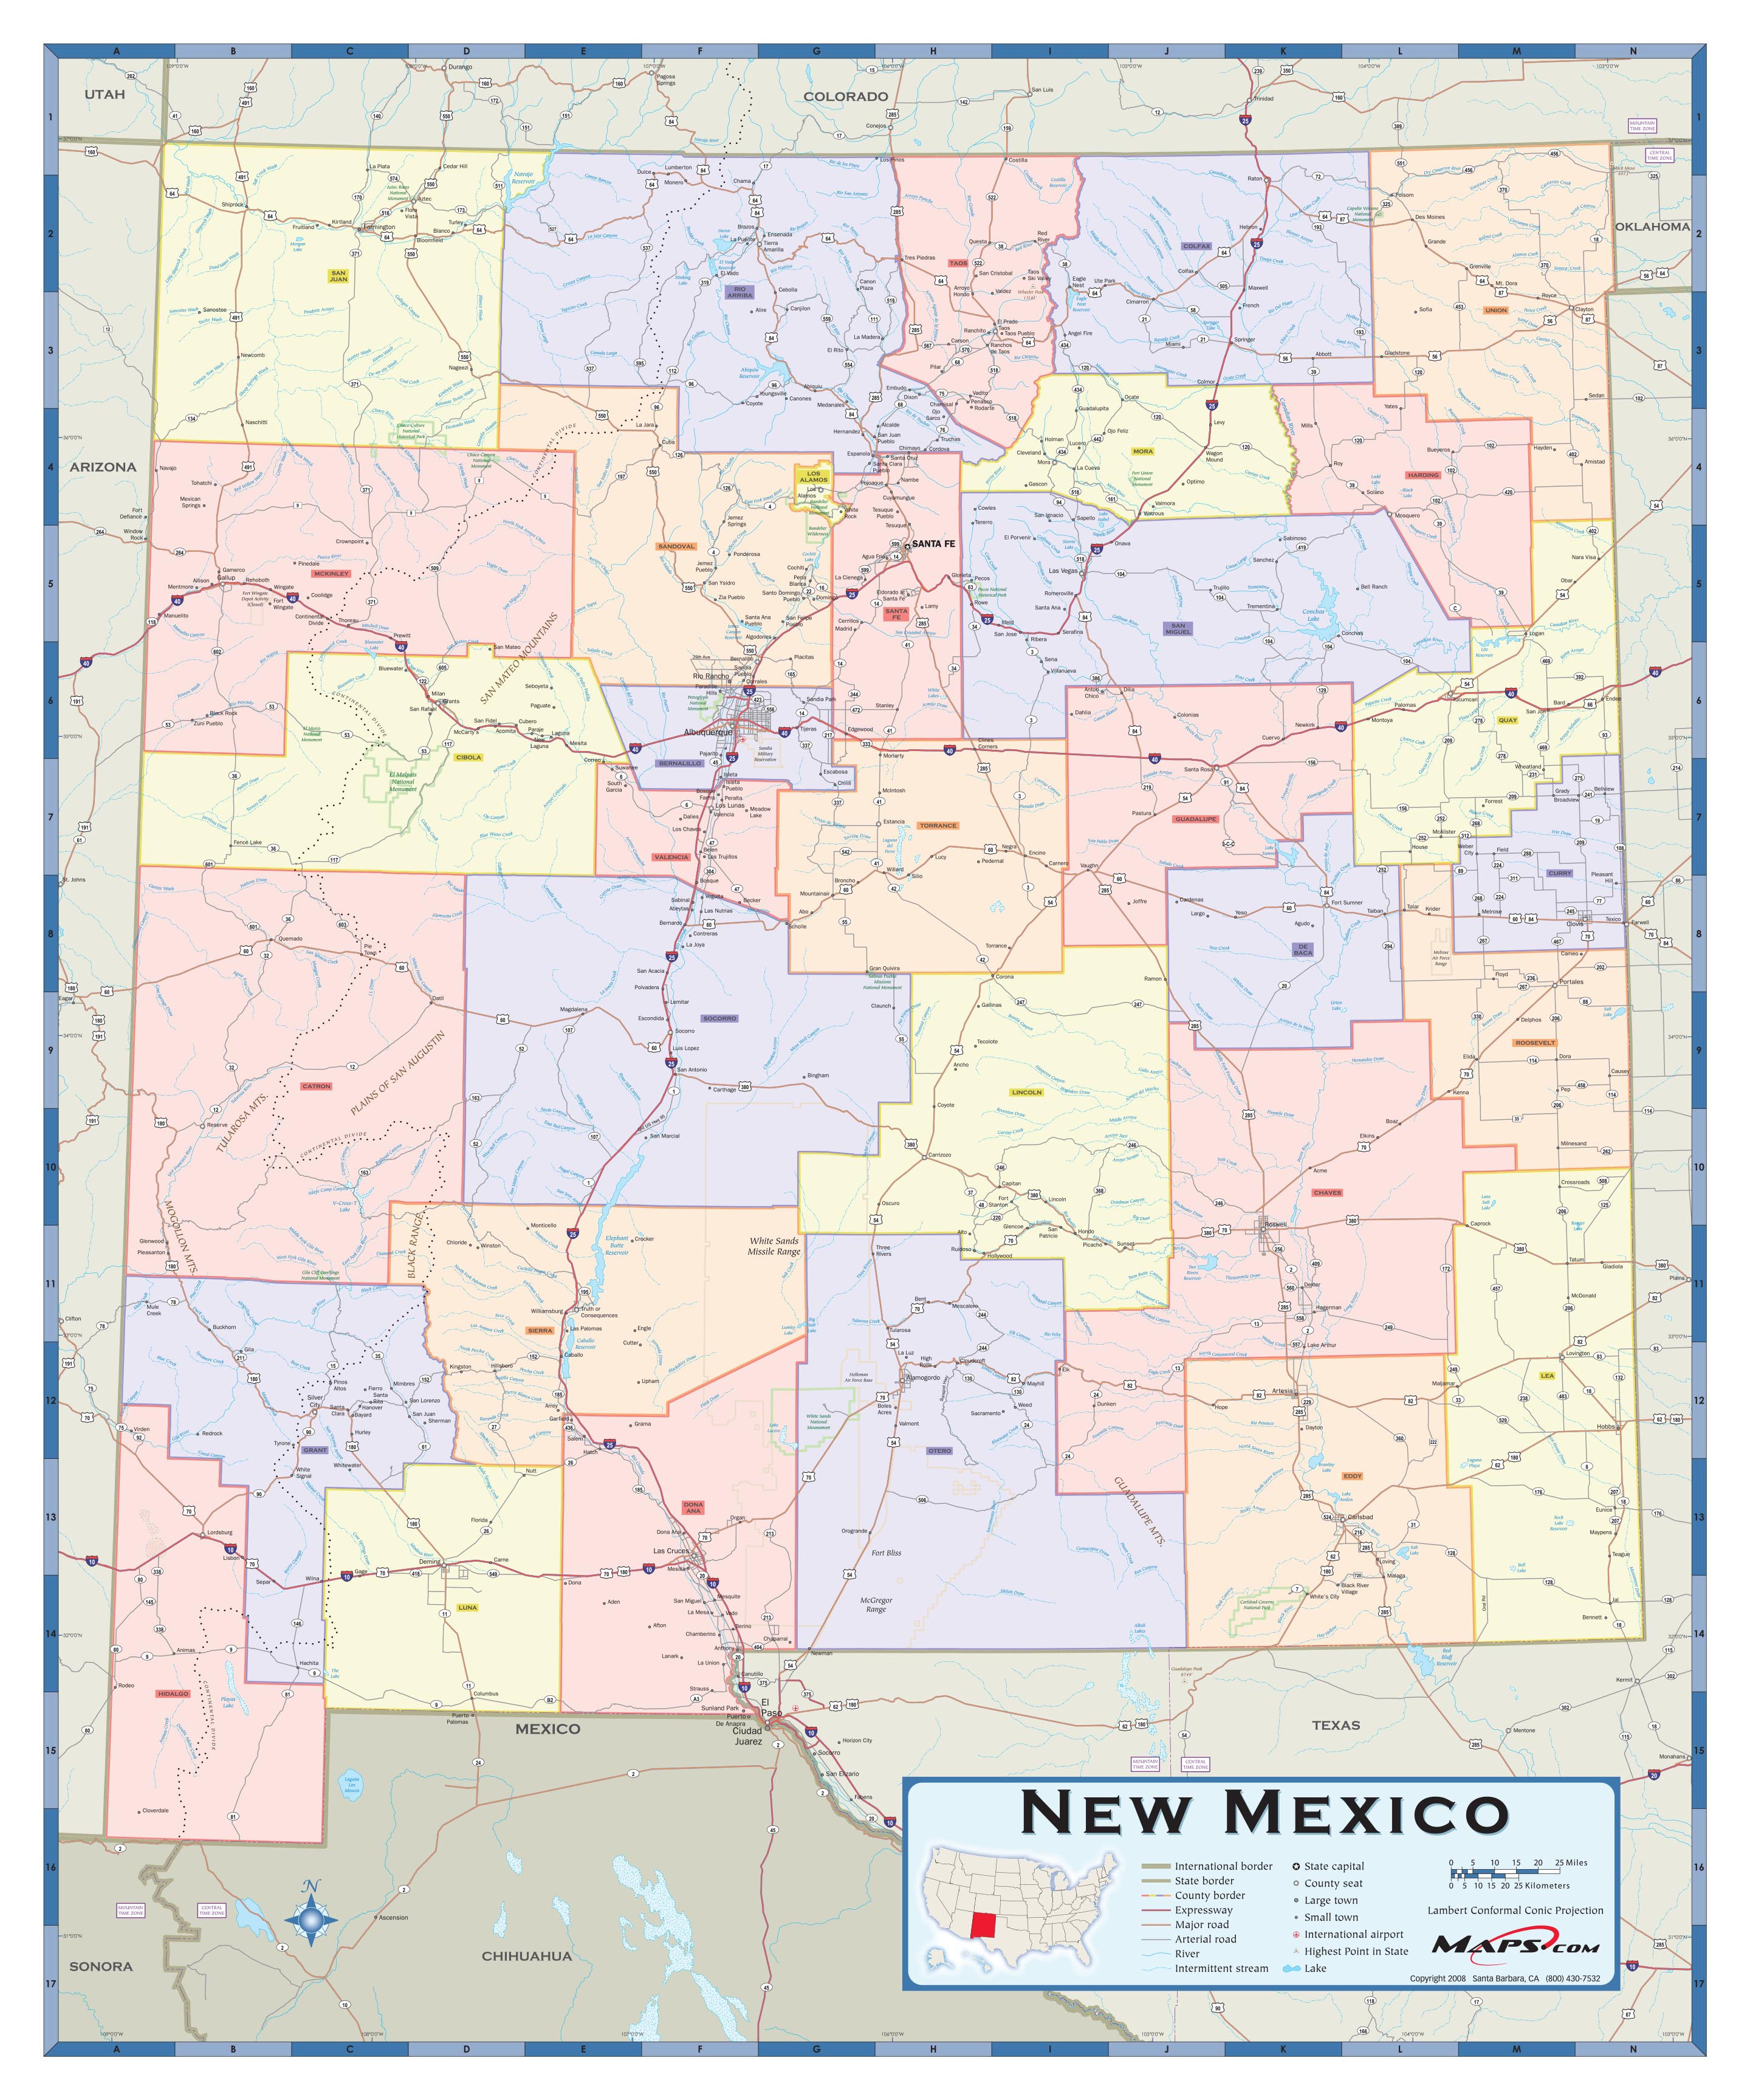 New Mexico Counties Wall Map by Maps.com - MapSales